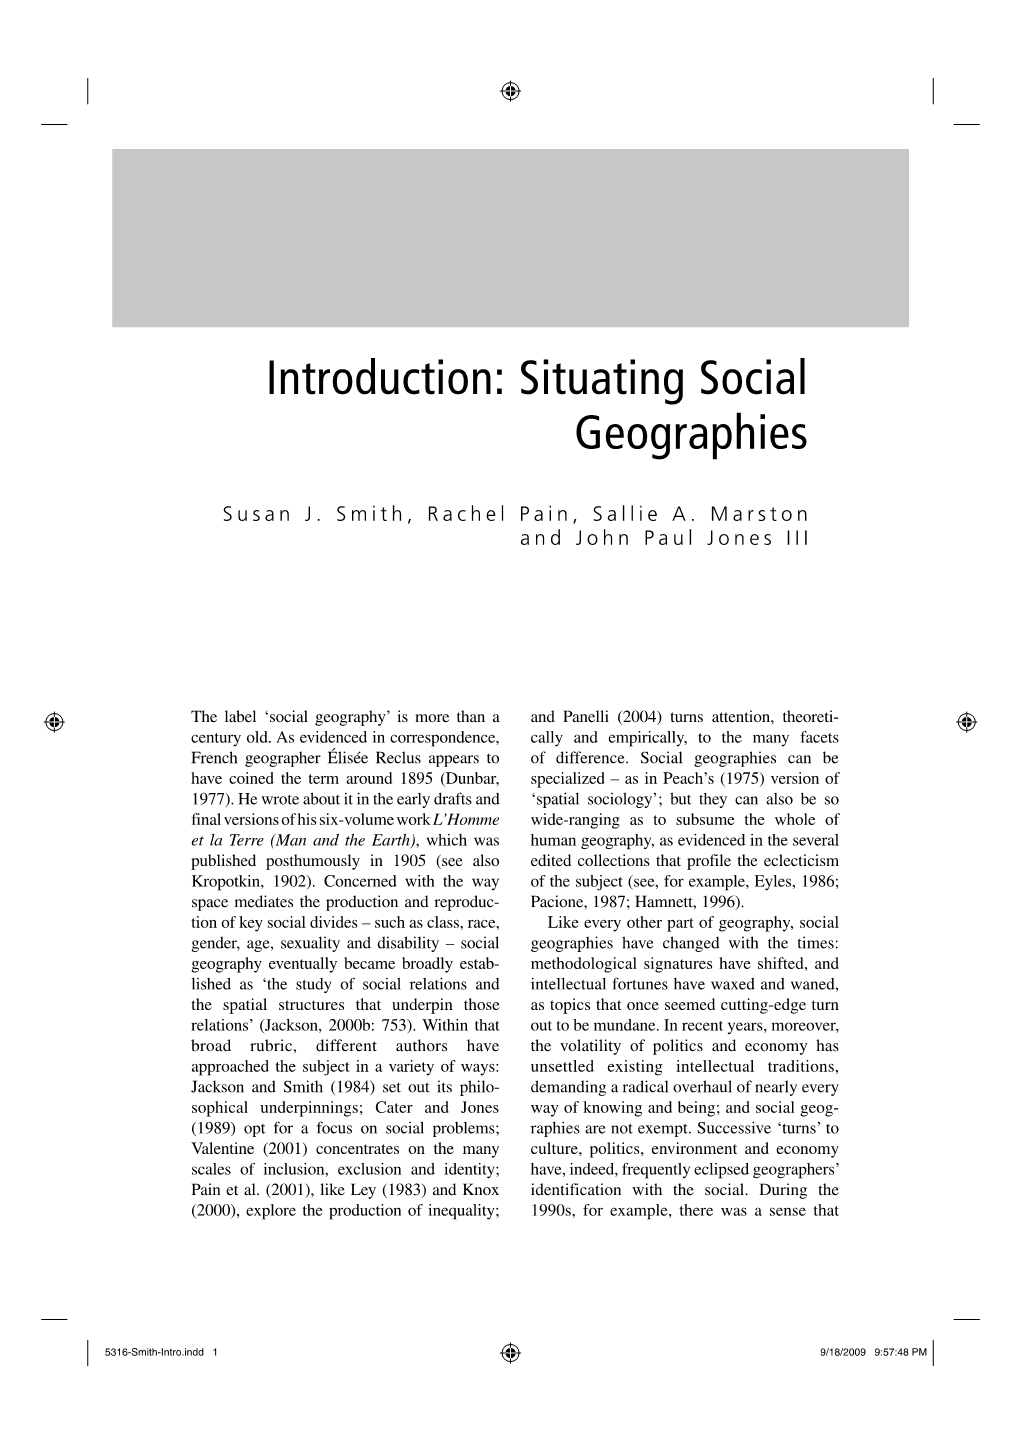 Situating Social Geographies